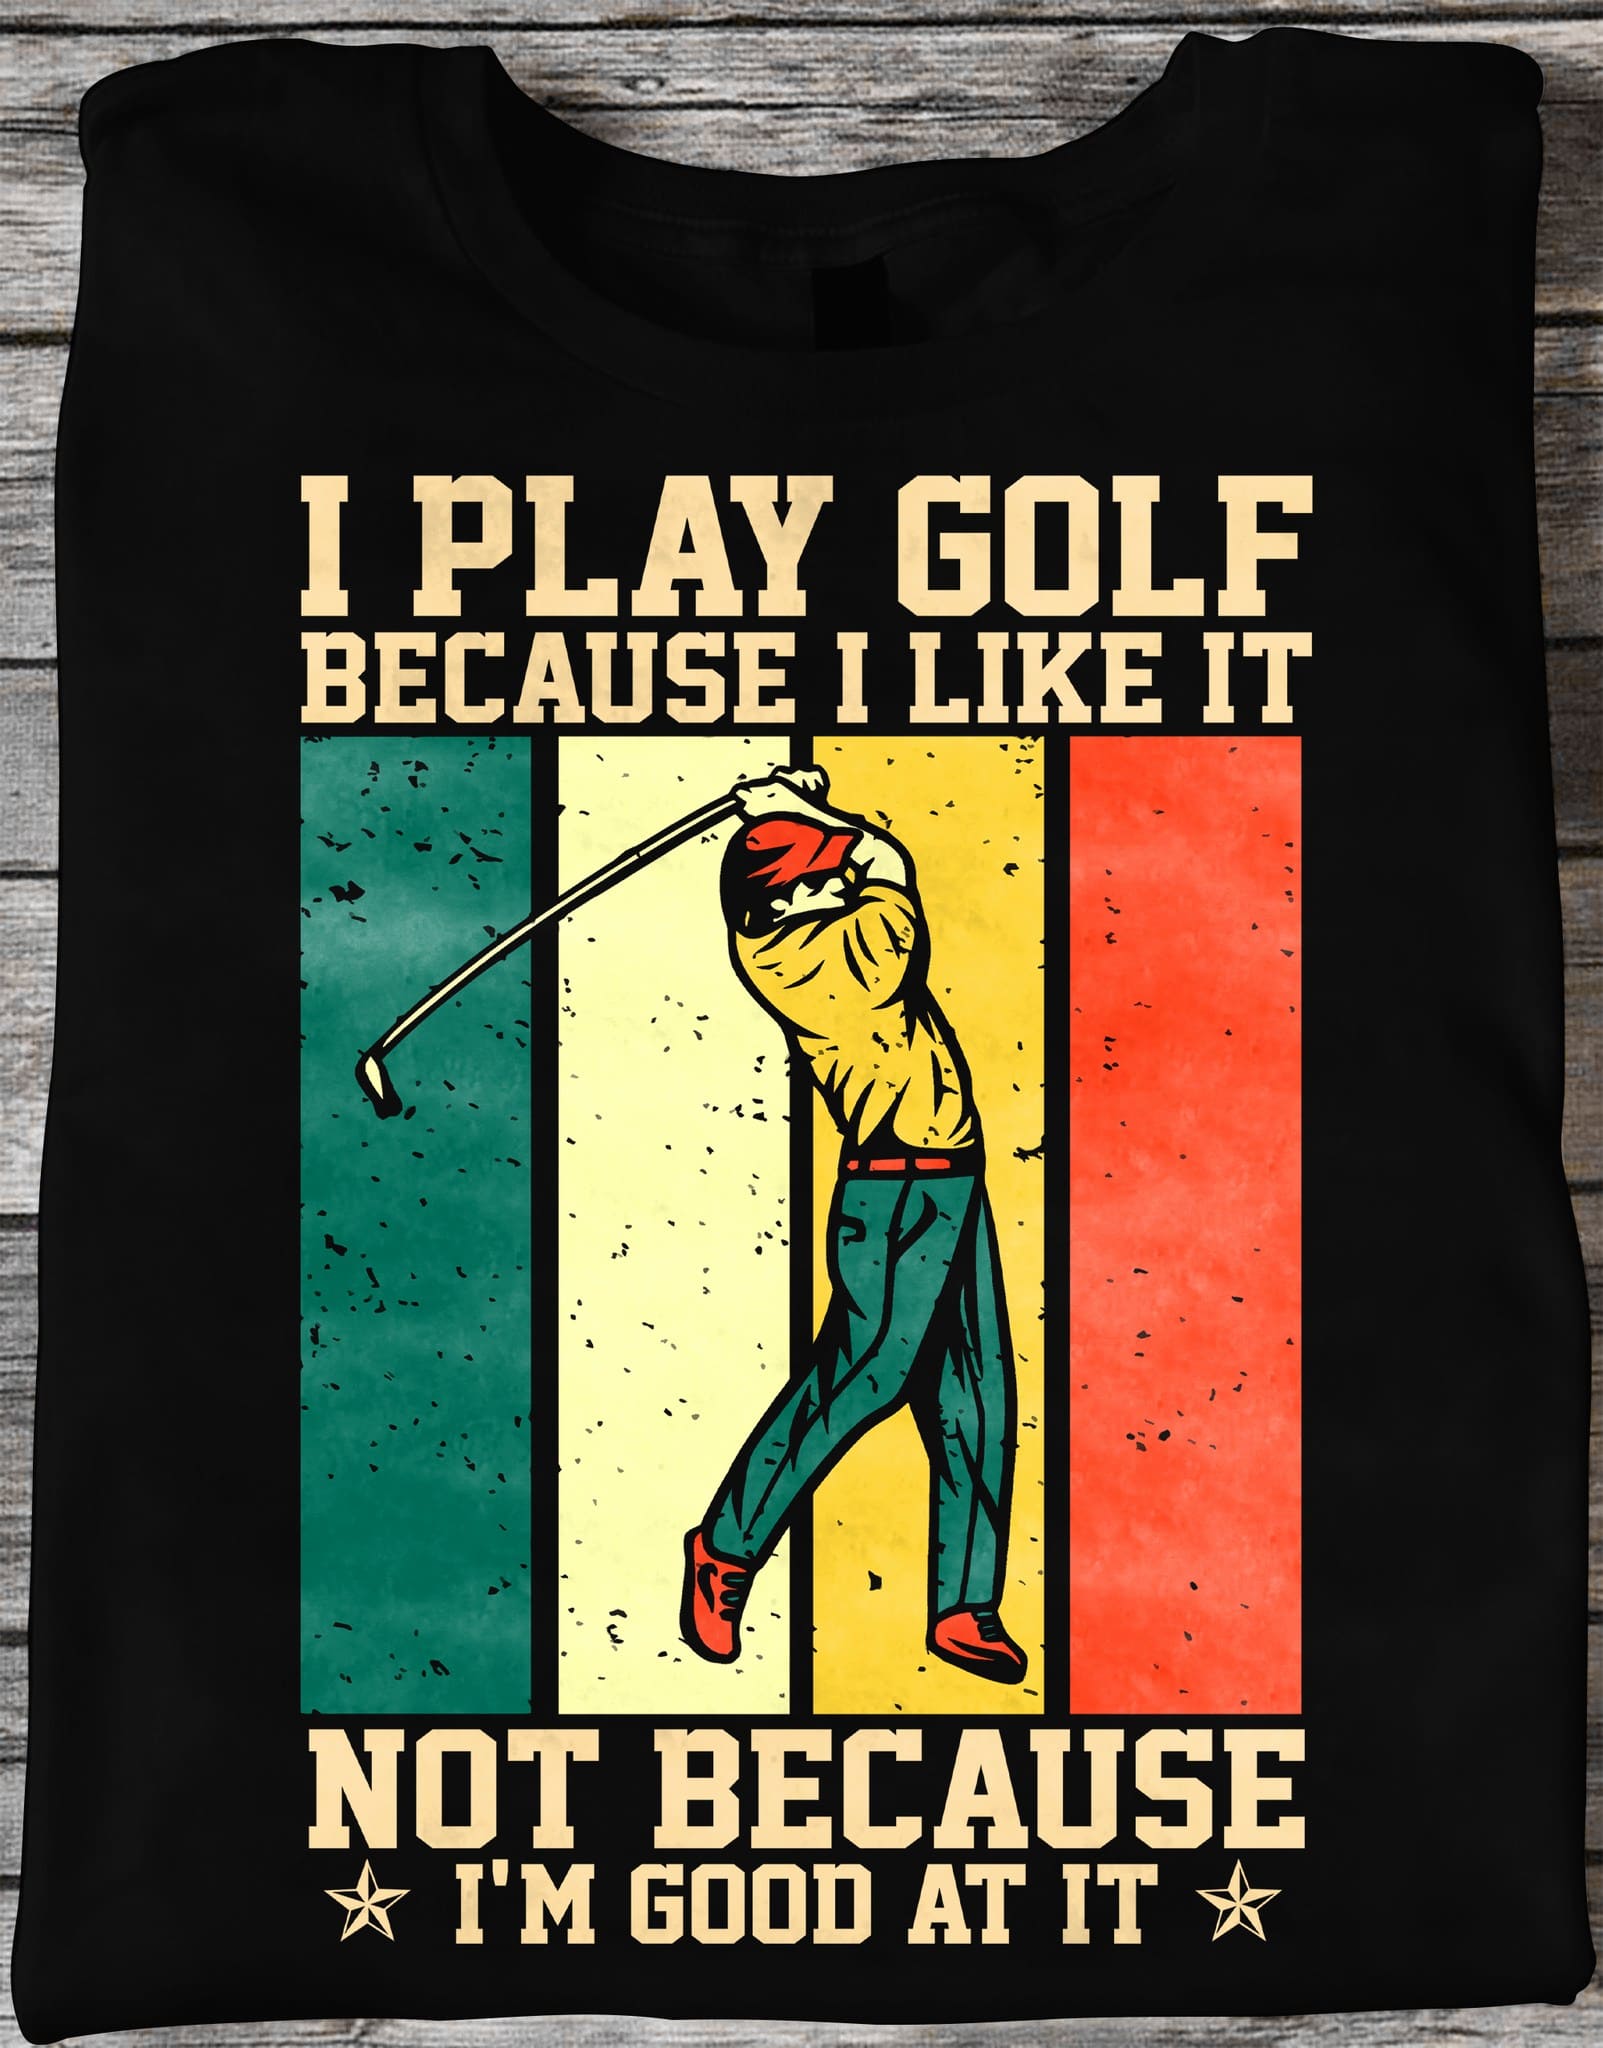 Golf Player - I play golf because i like it not because i'm good at it